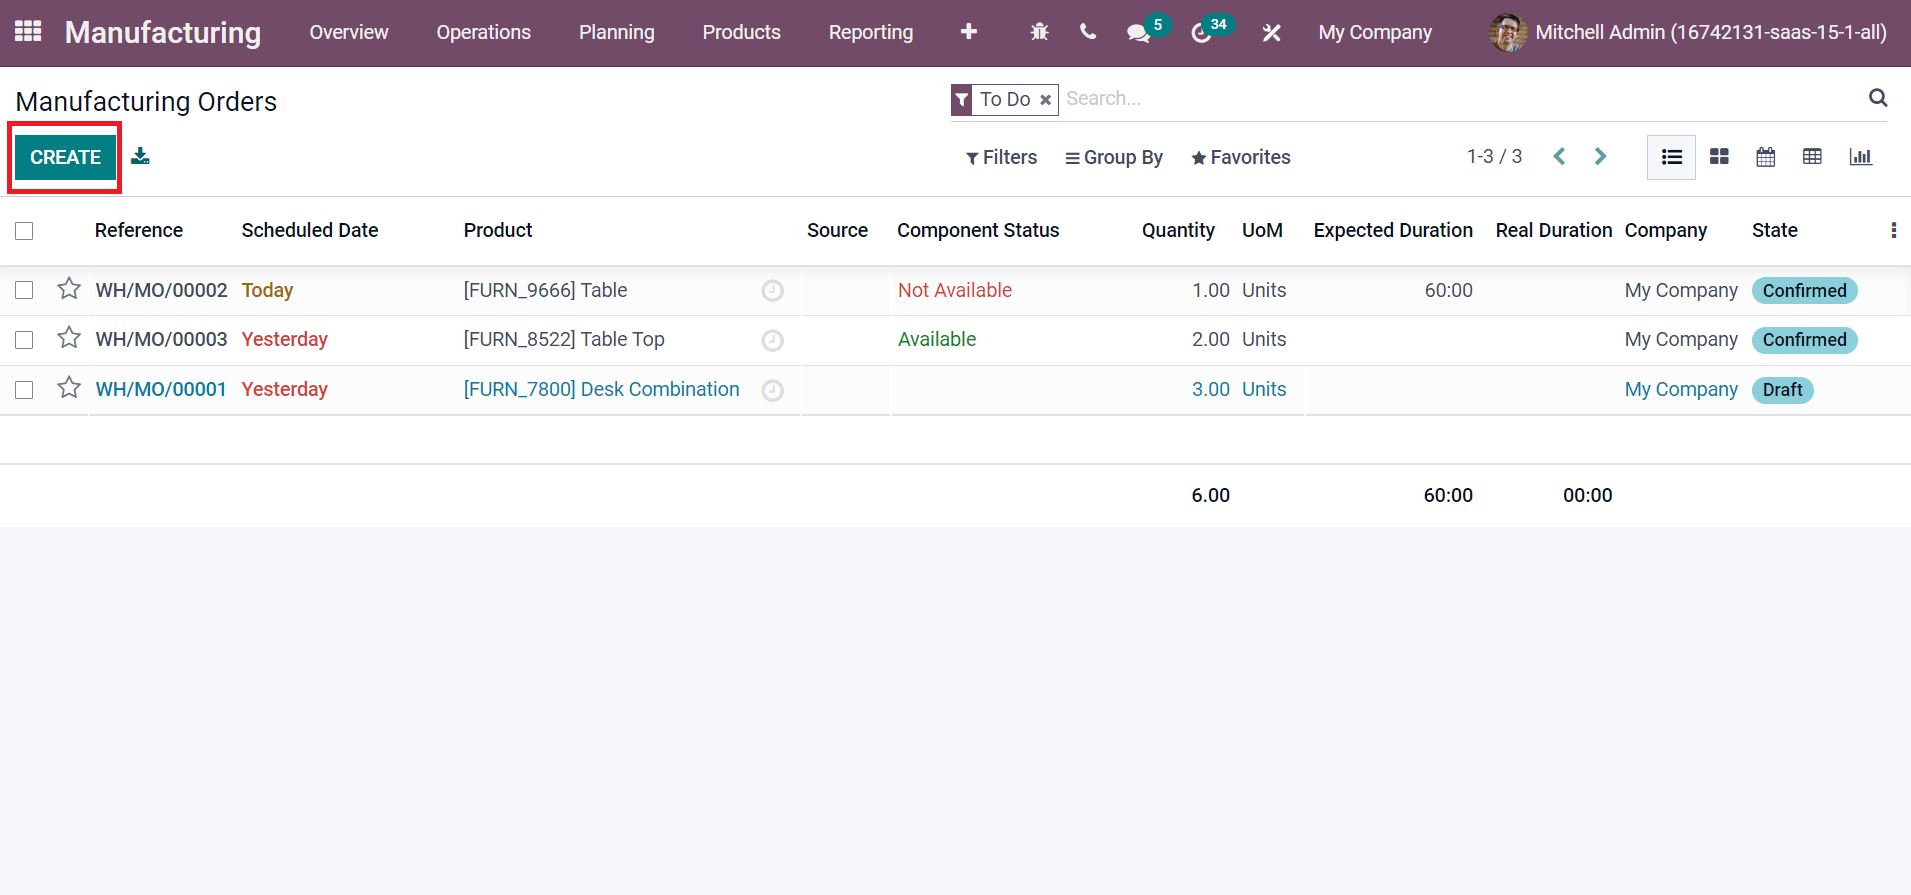 how-to-manage-unbuild-orders-with-the-odoo-15-manufacturing-cybrosys